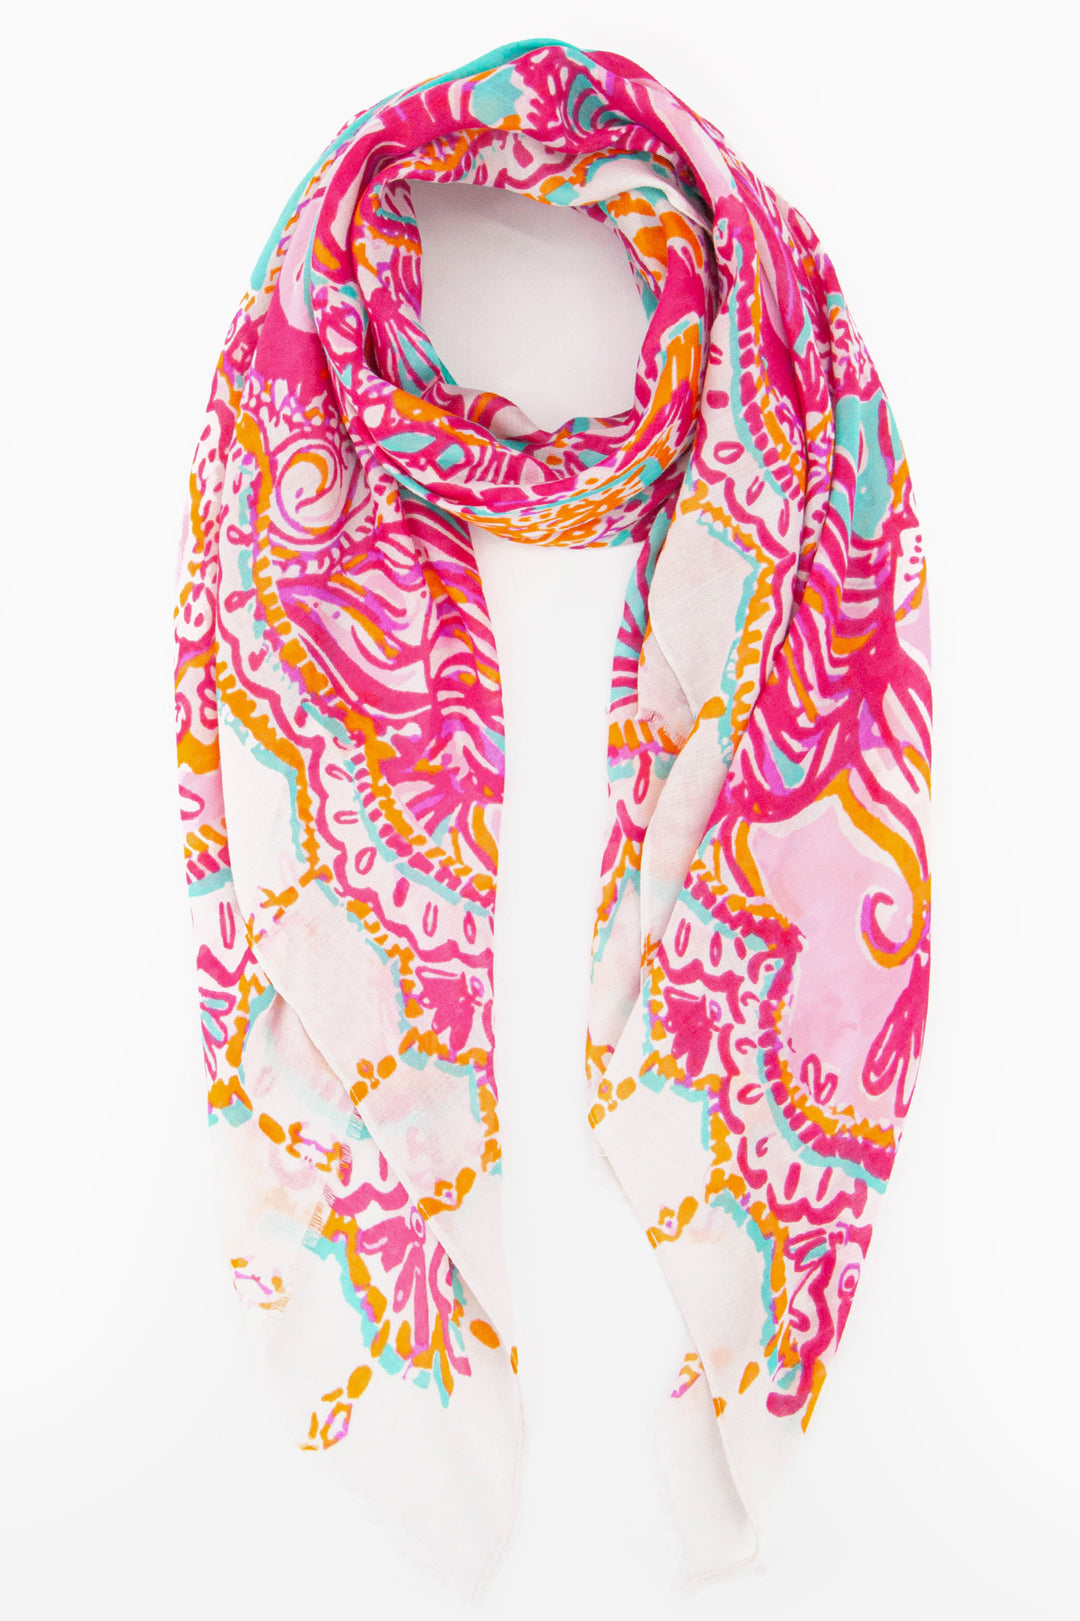 pink and orange ornate nautical themed scarf featuring seashells and fish